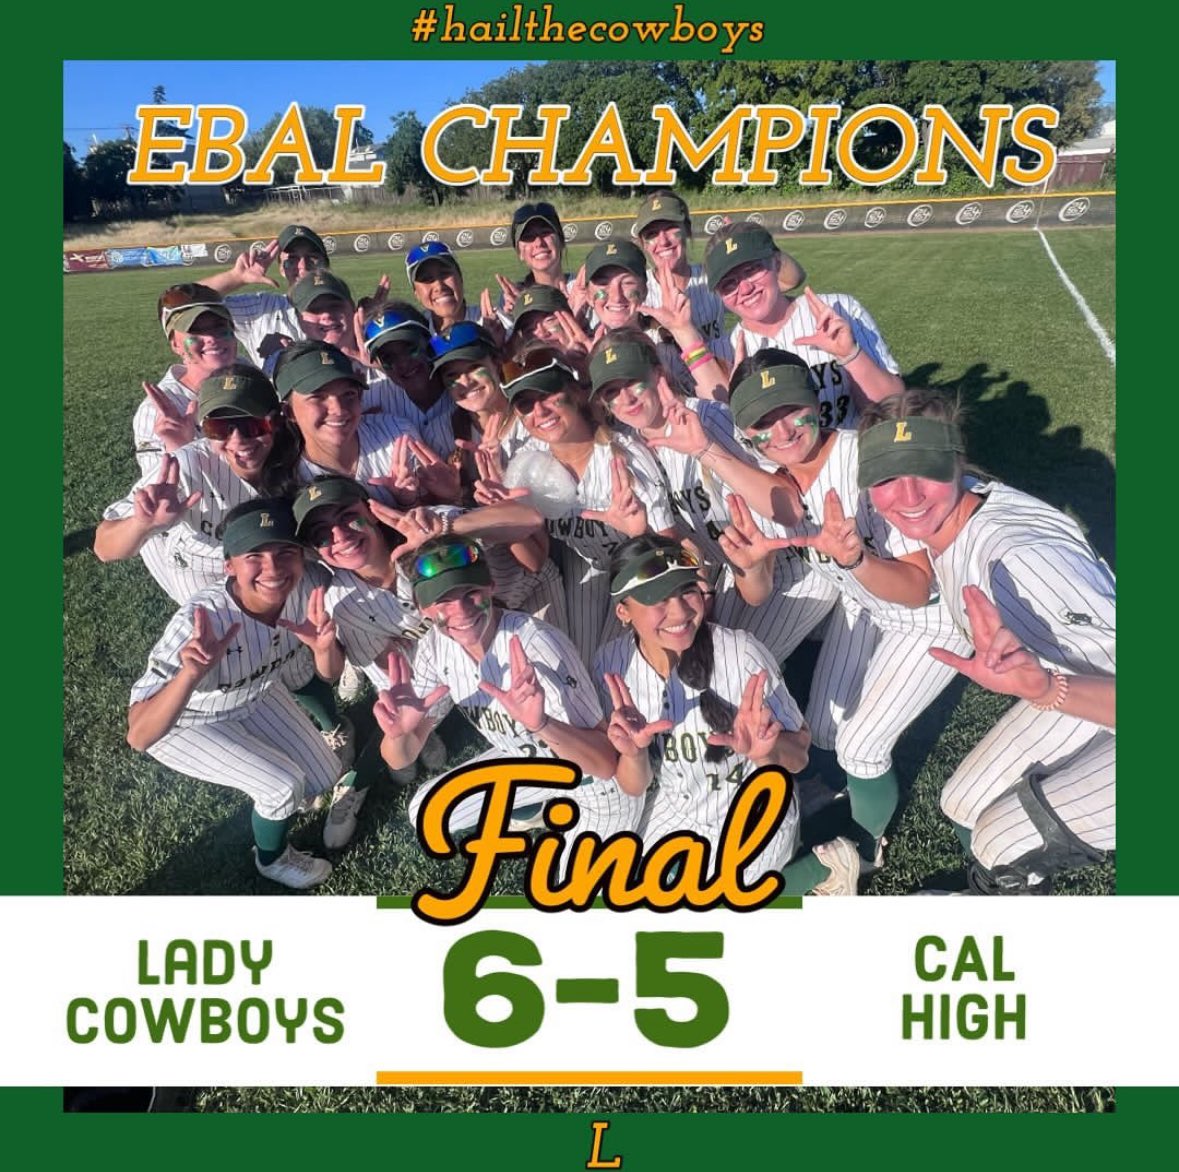 EBAL CHAMPIONS for the second time EVER!! 🏆 Proud of us!!!💚🤠💛 On to NCS playoffs next week. #hailthecowboys @LHSSoftball8 @THE_EBAL_SPORTS @CIFNCS @westcoastpreps_ @49erscalhi @MaxPreps